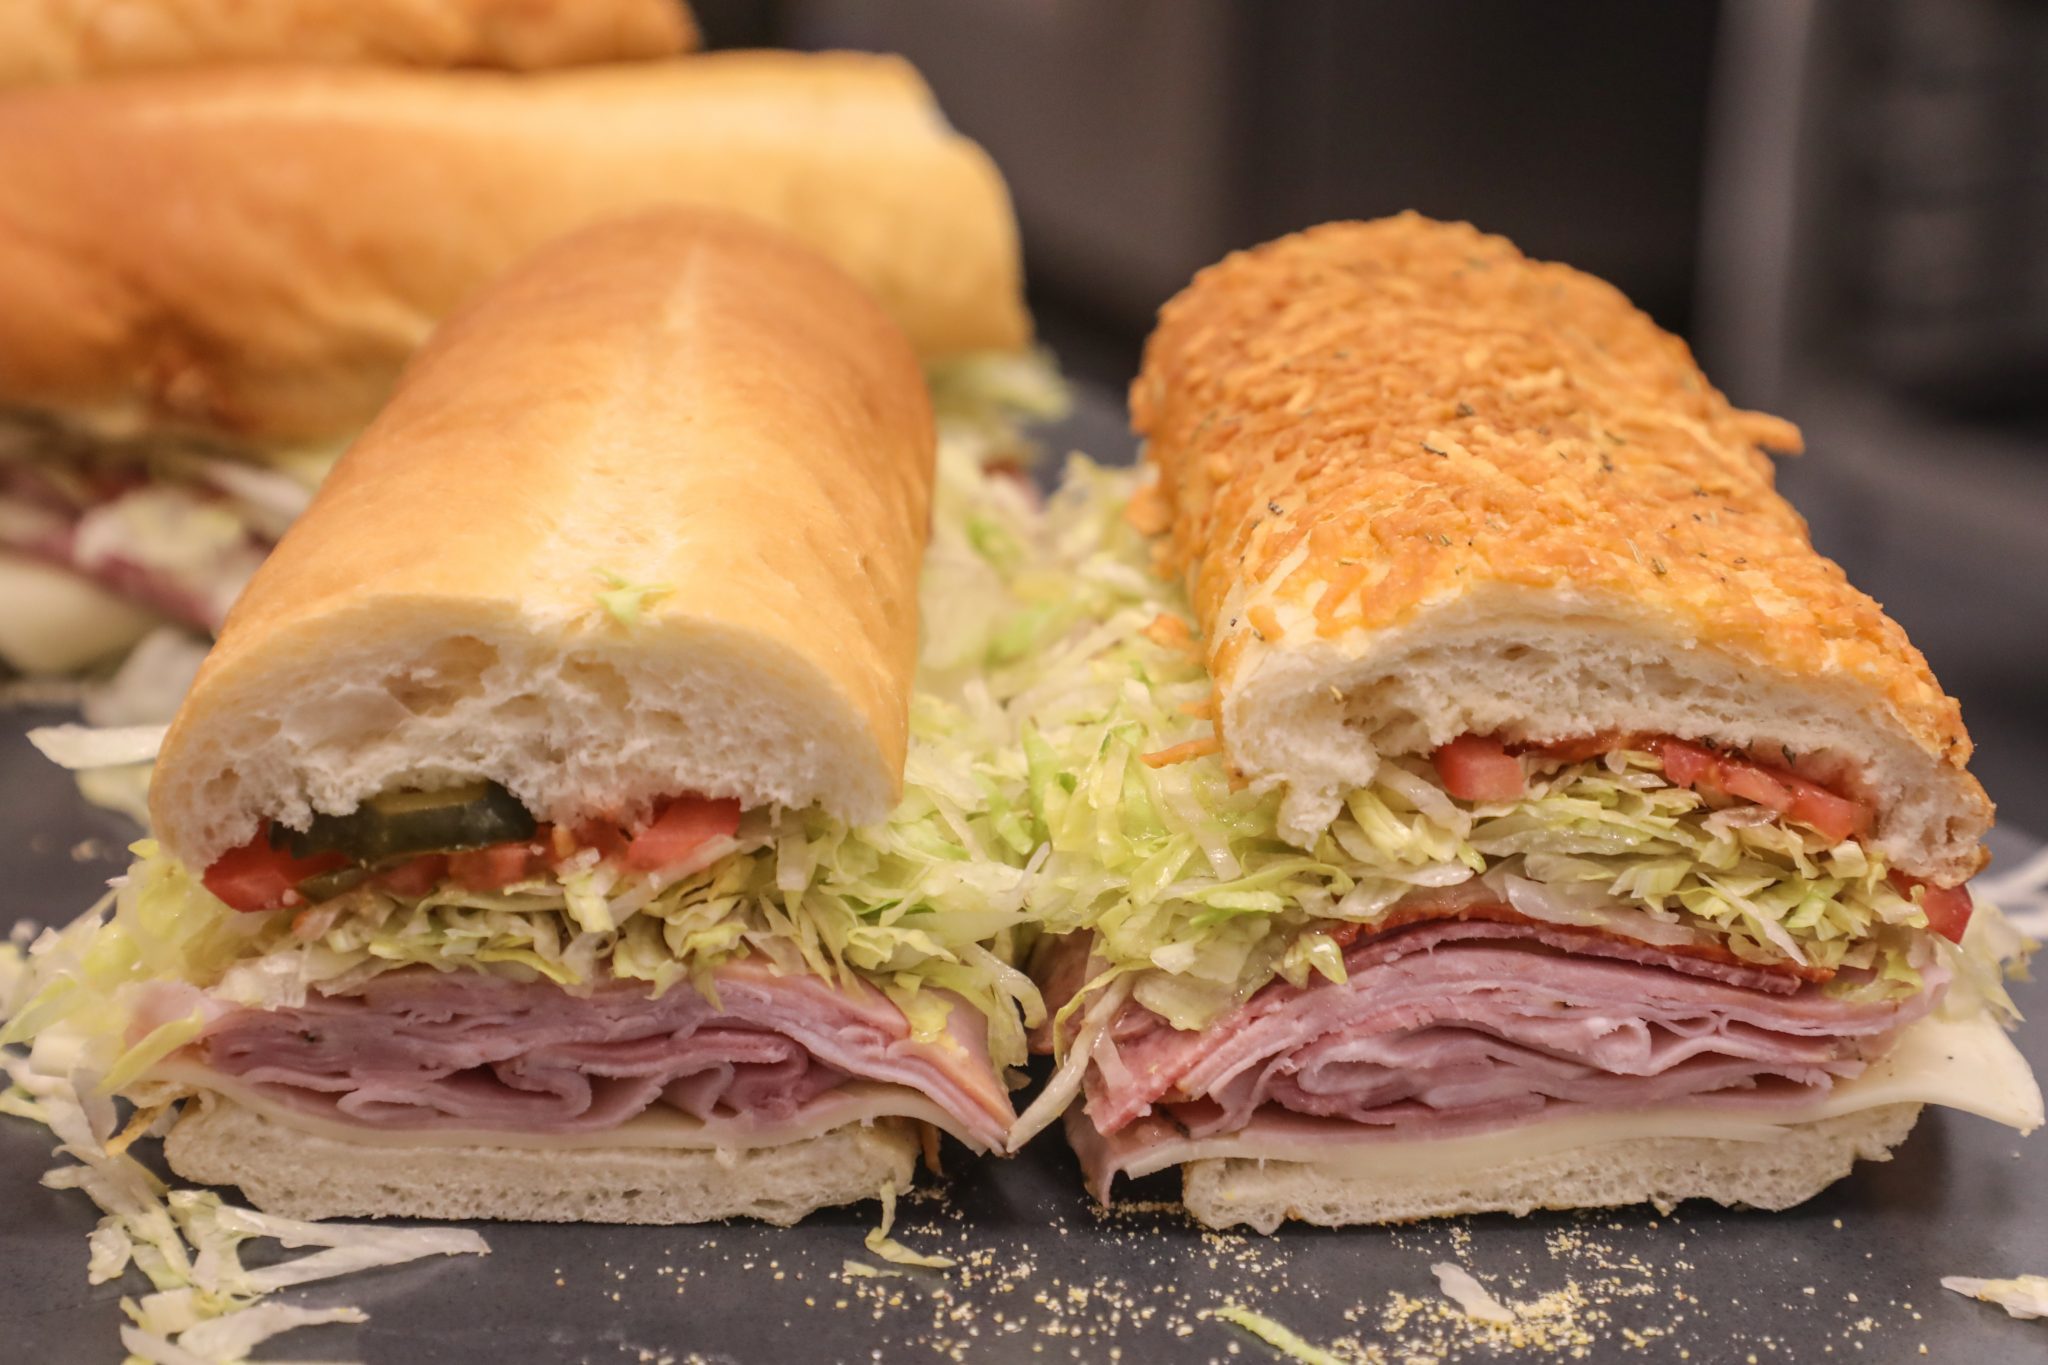 Jersey Mike's offers wide variety of top-quality hot and cold ...